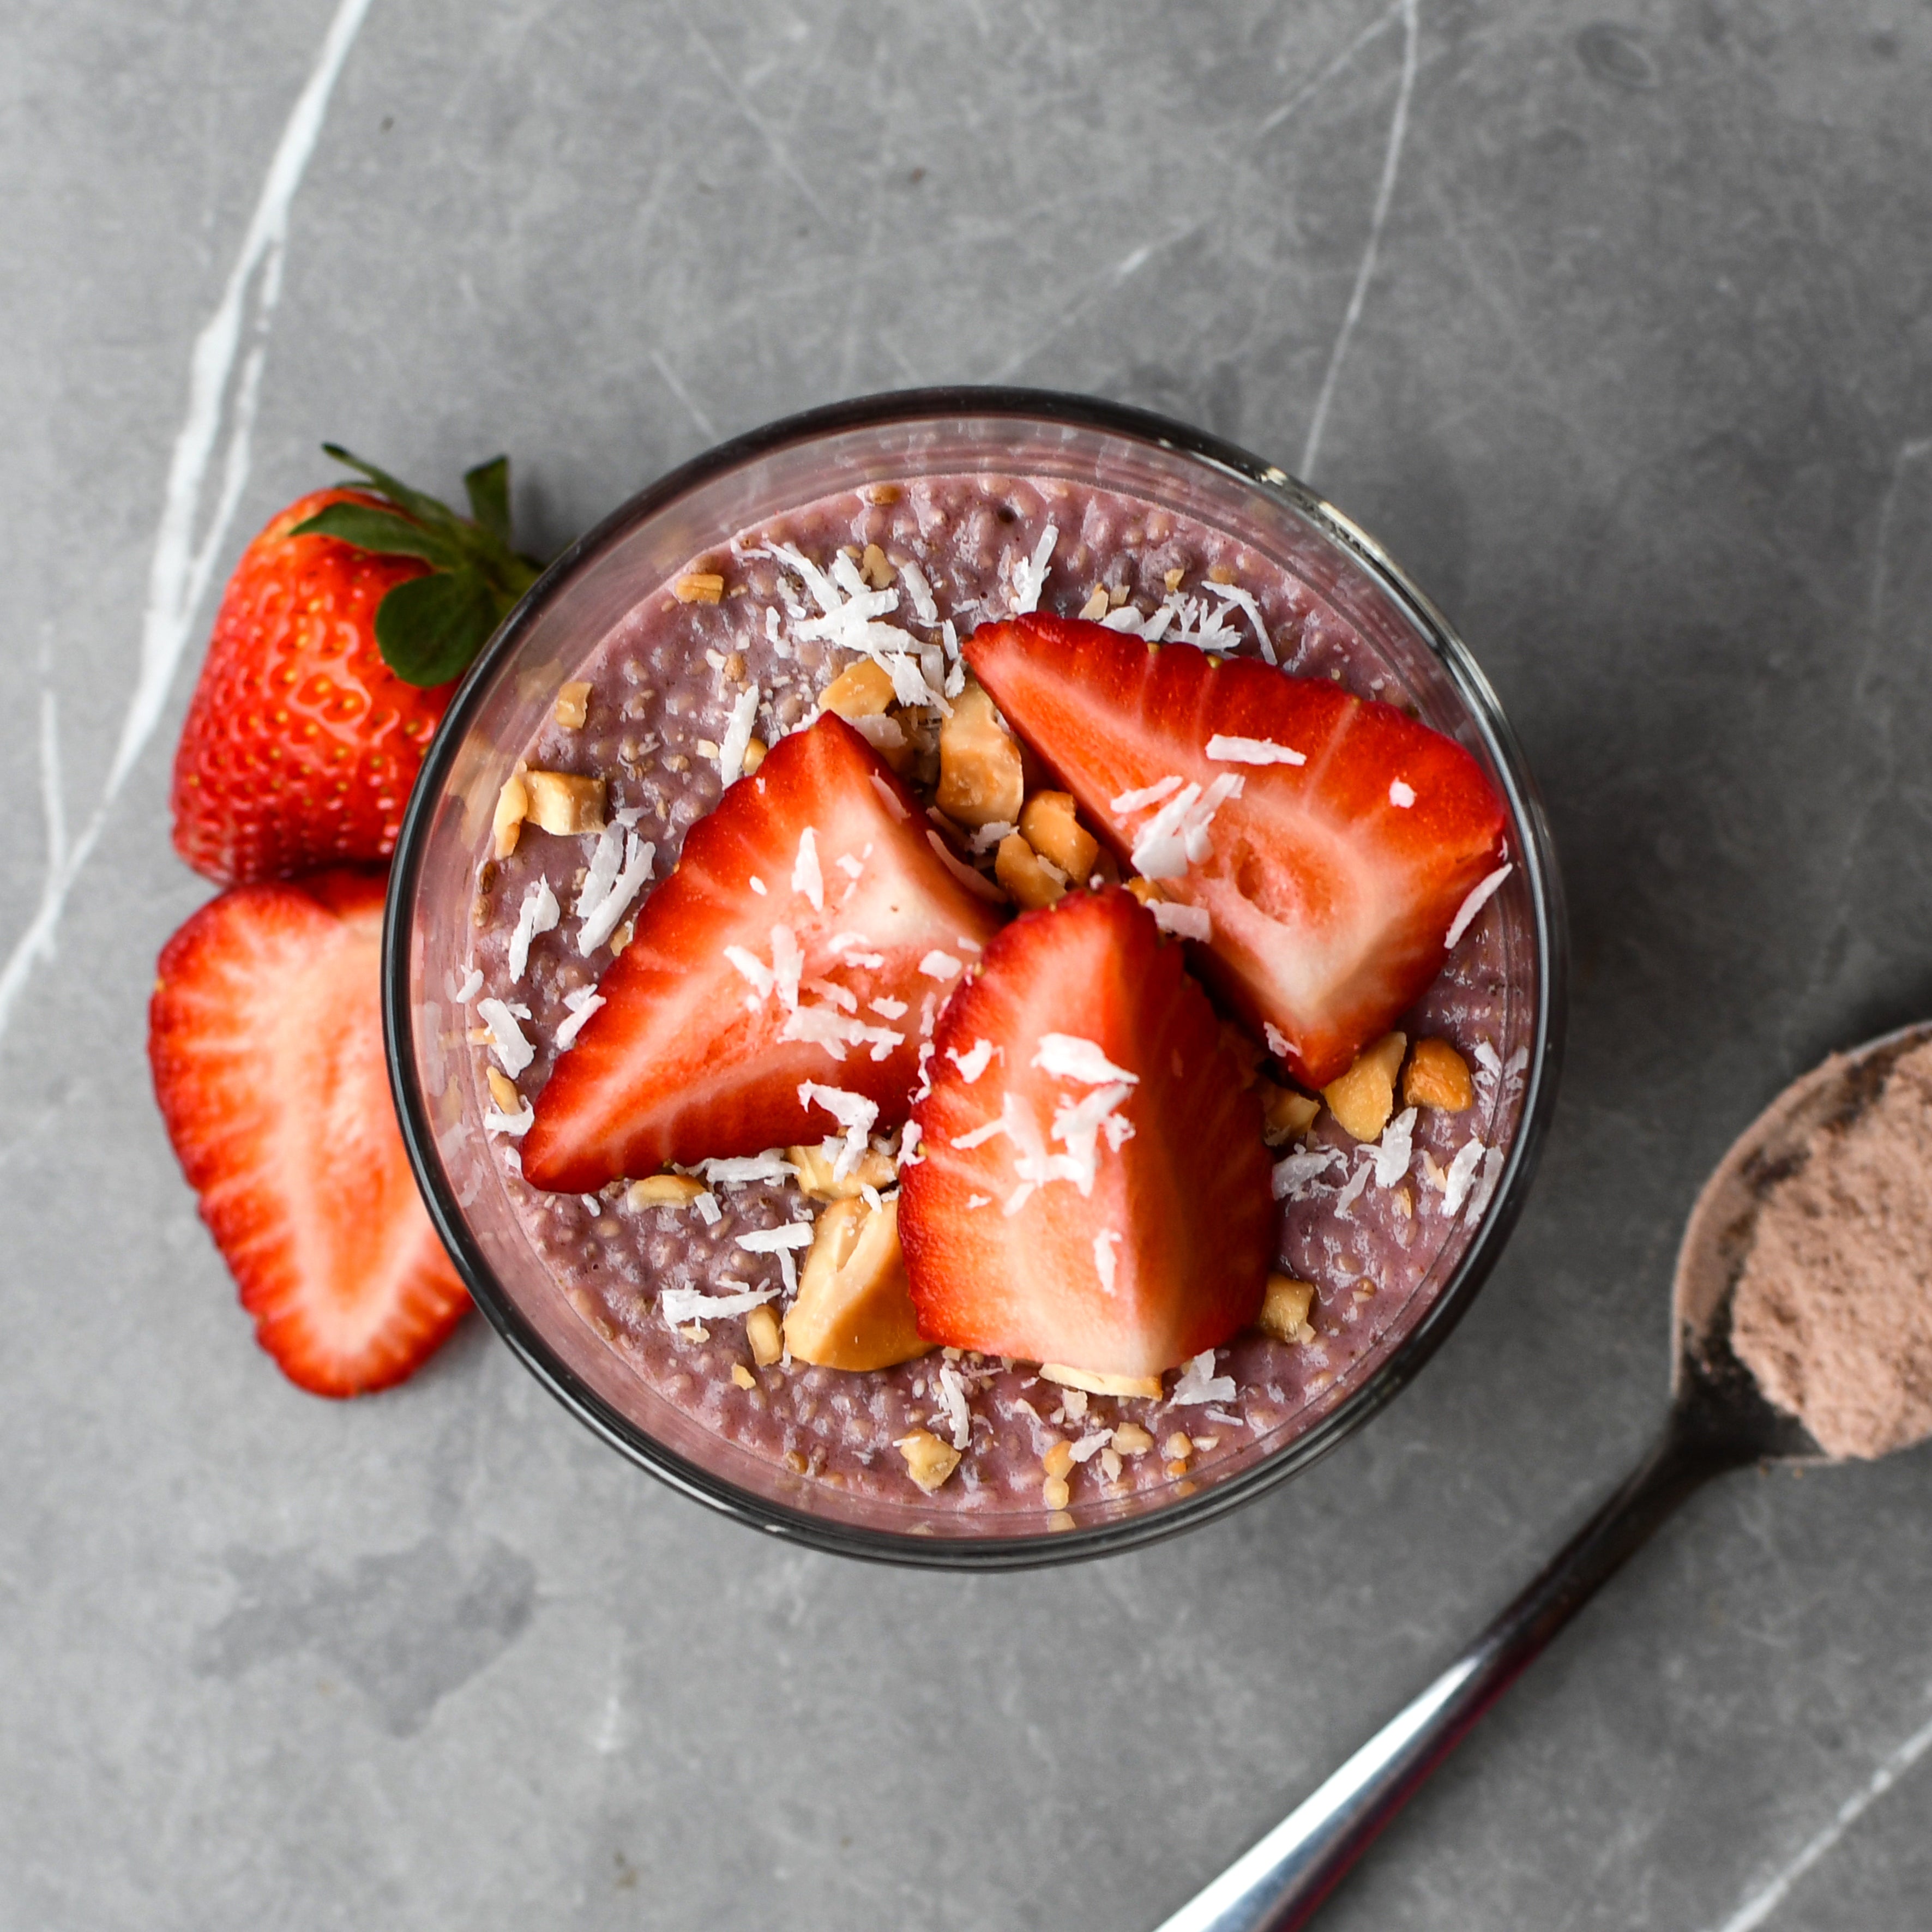 STRAWBERRY CHIA SEED PUDDING